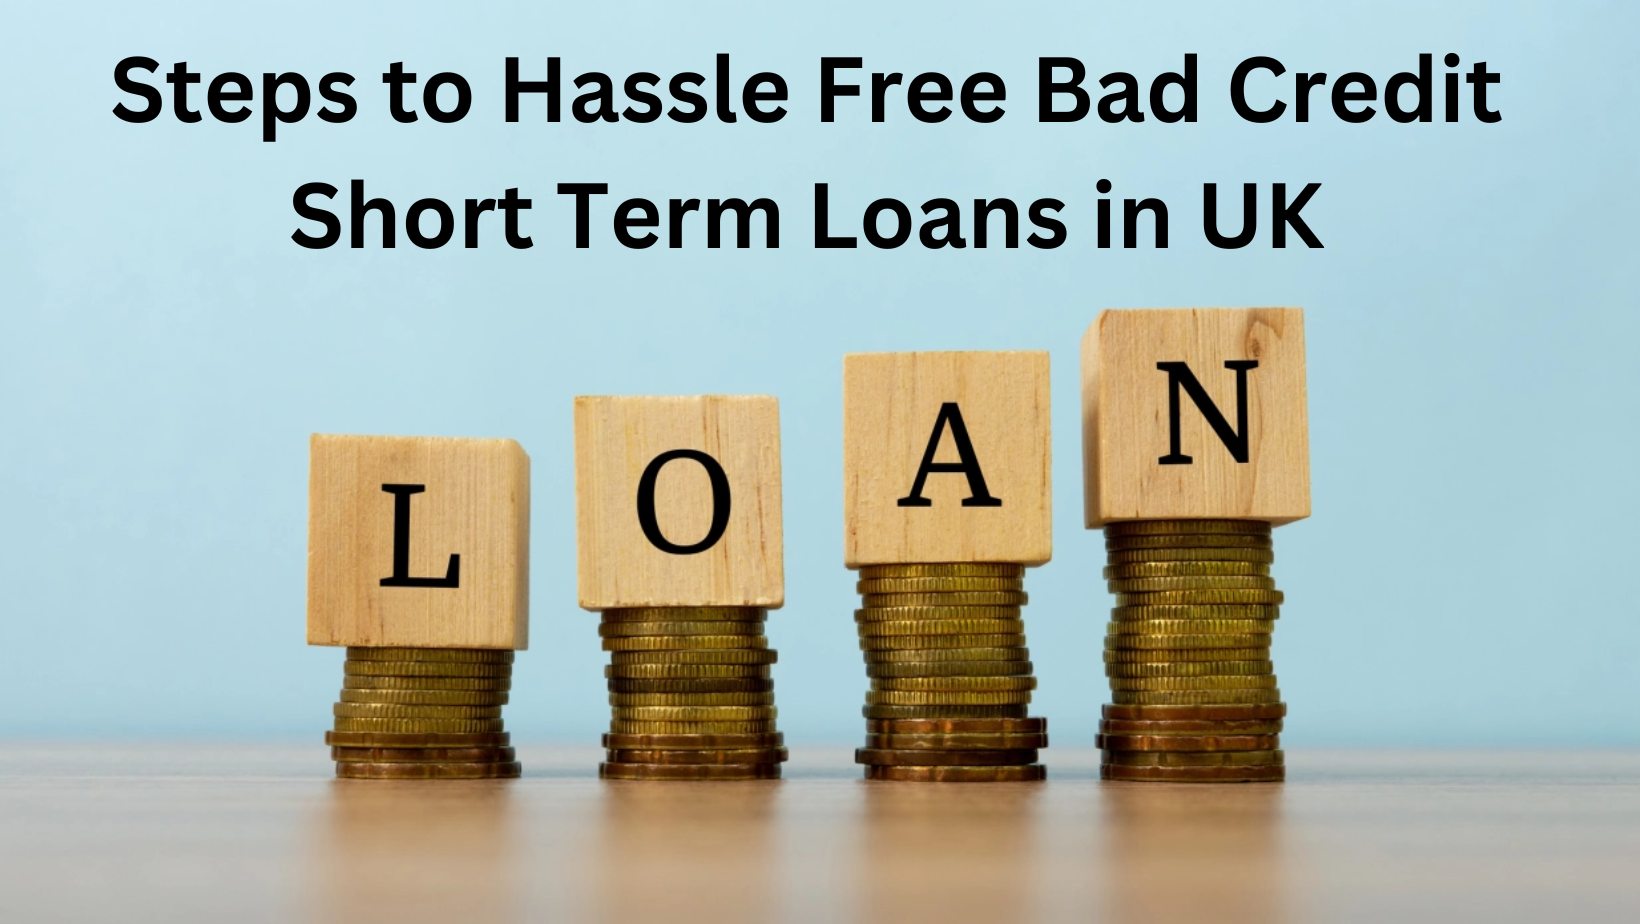 Steps to Hassle Free Bad Credit Short Term Loans in UK